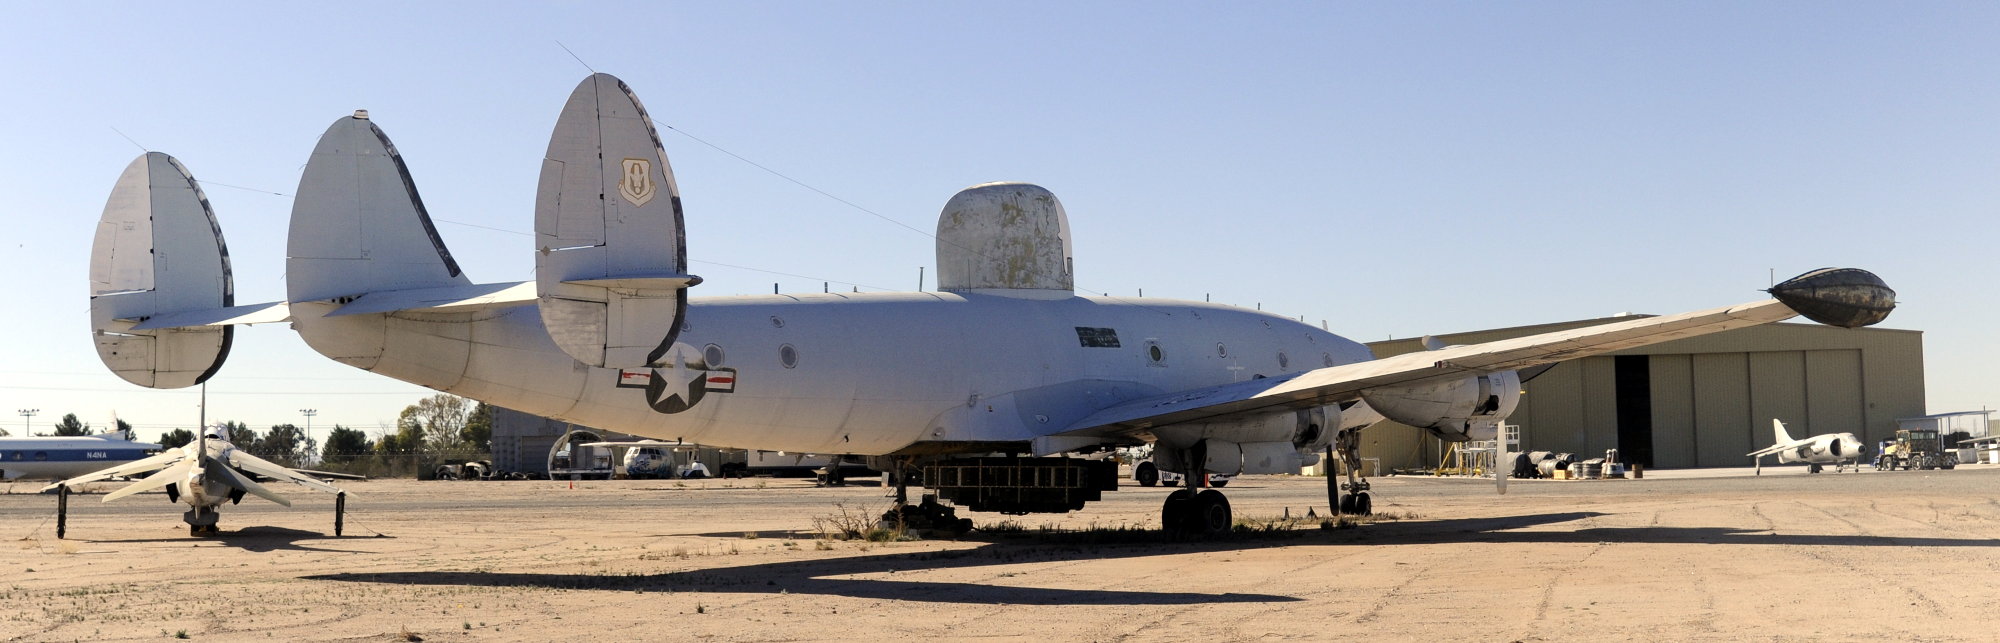 Constellation configured as radar picket, at Pima Air and Space Museum, Tucson, Airzona